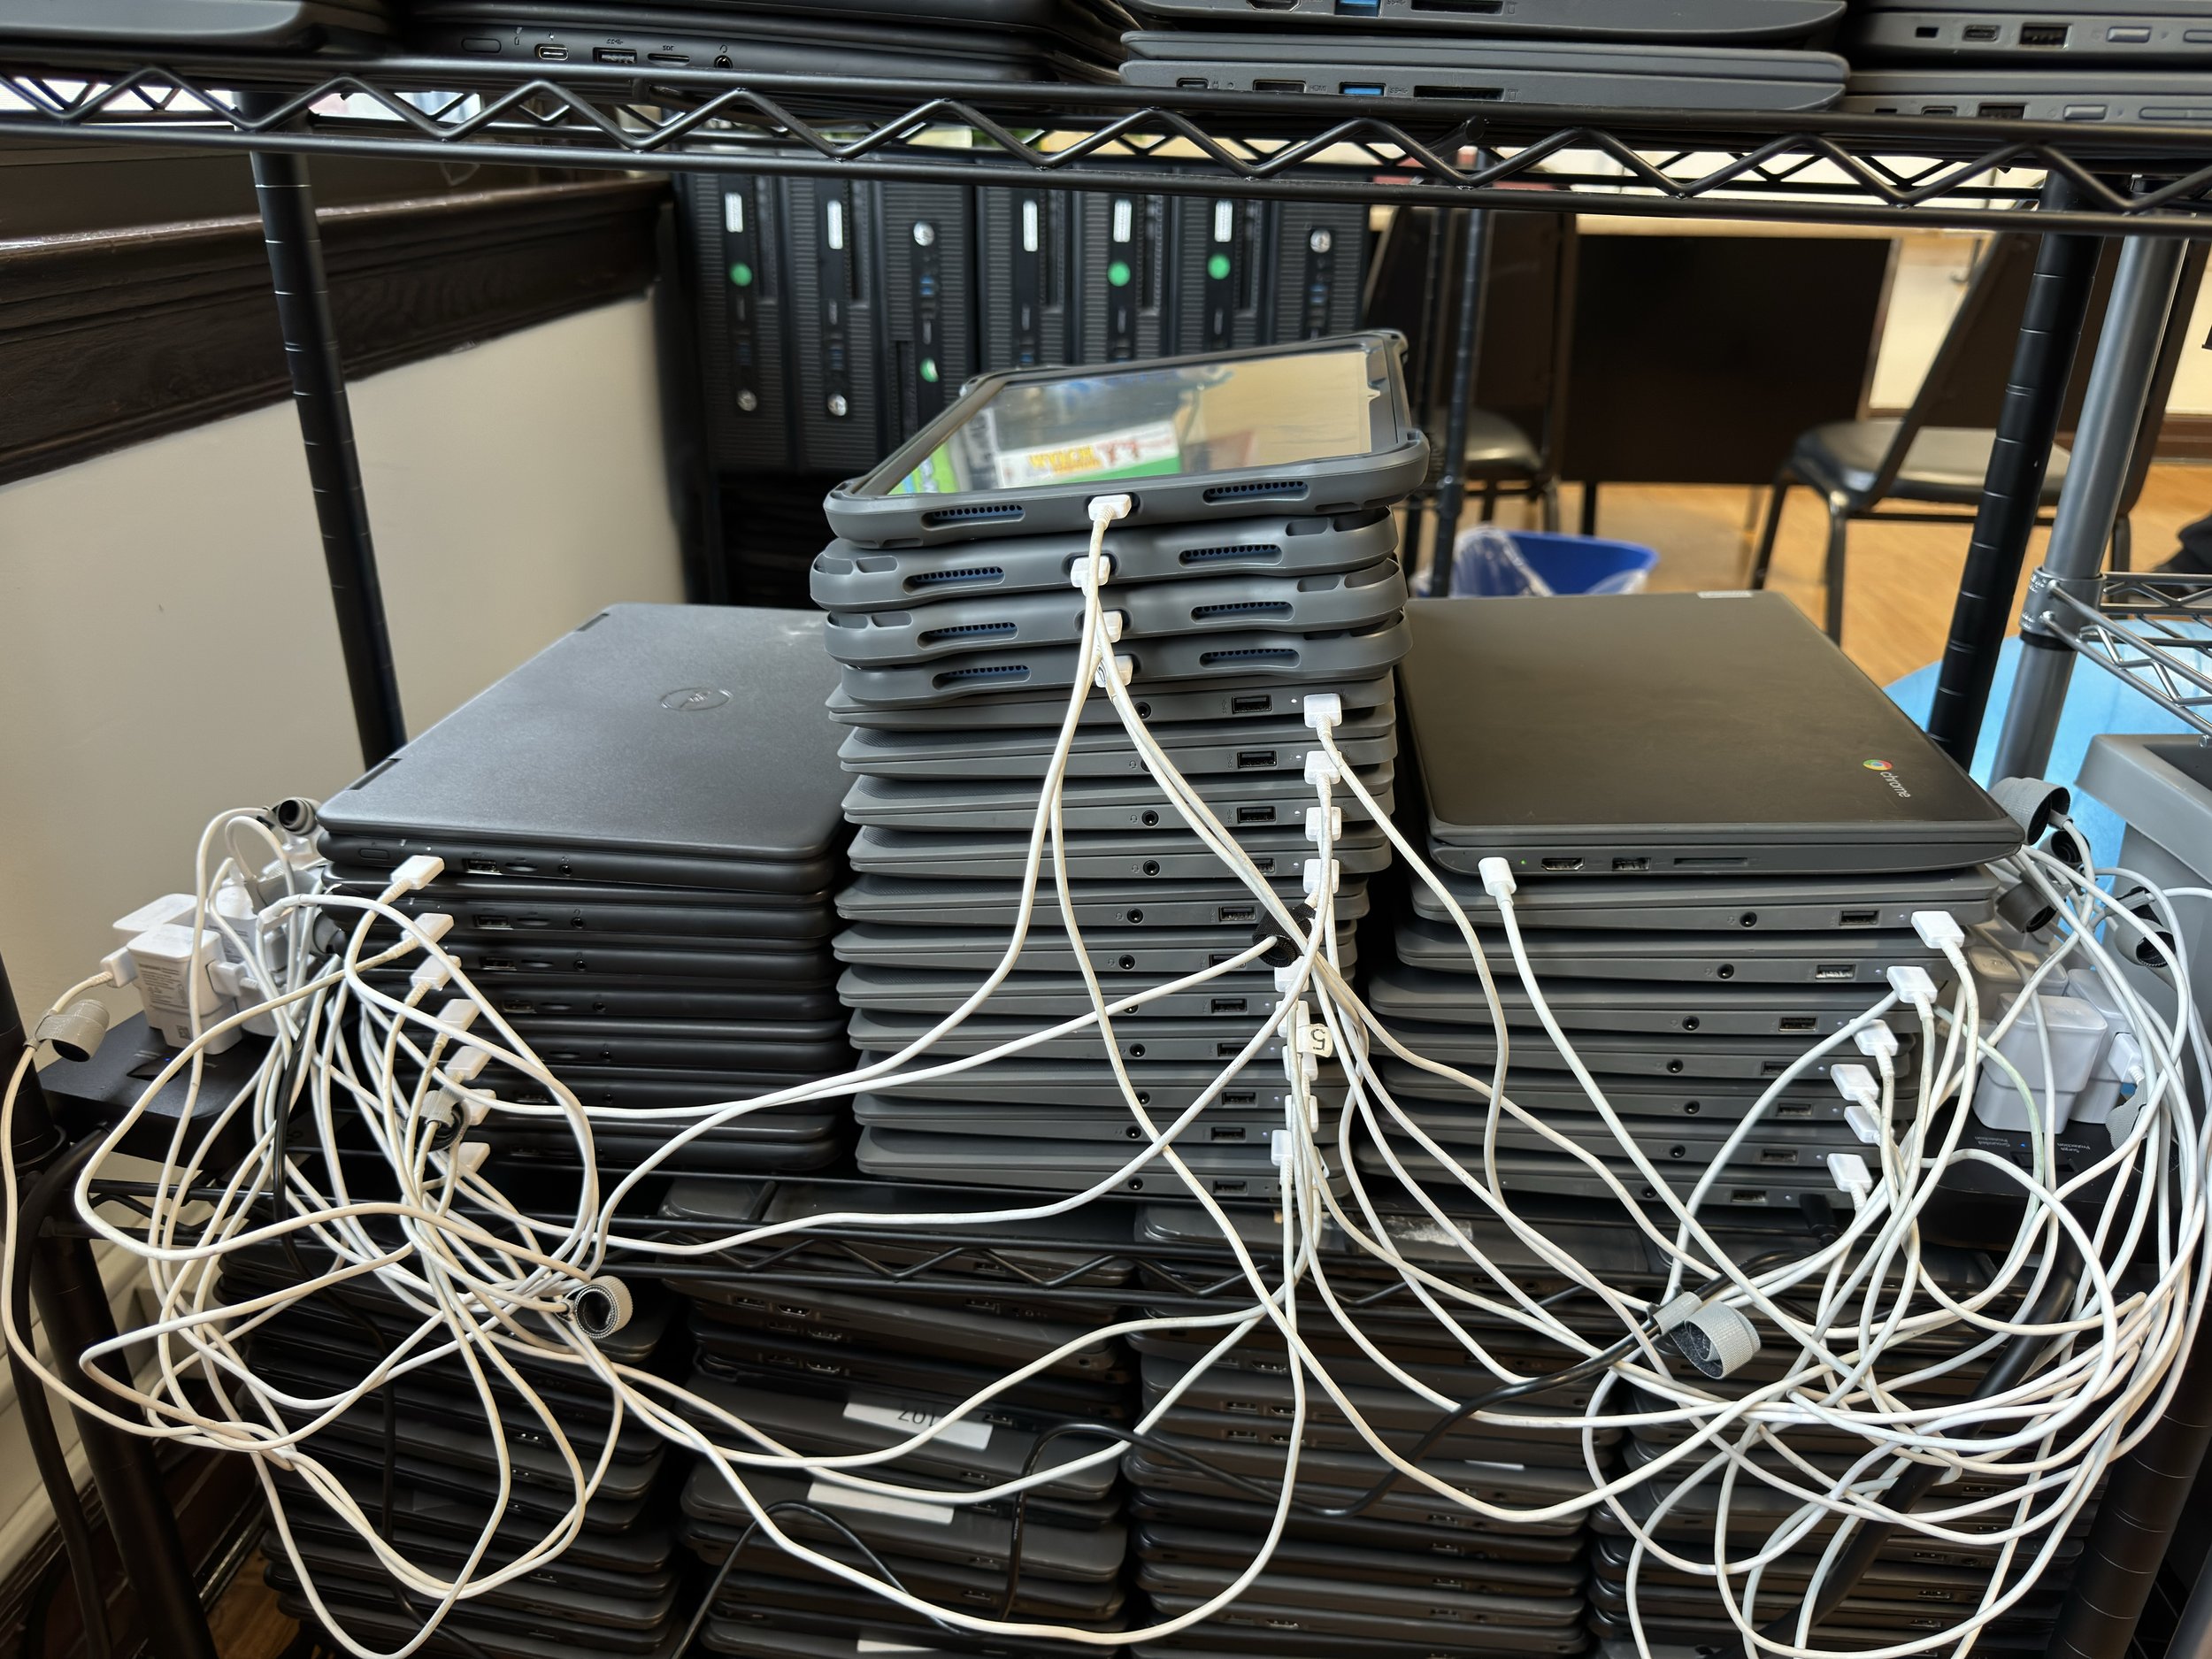  Stacks of many Chromebooks and a few iPads plugged in to chargers. 